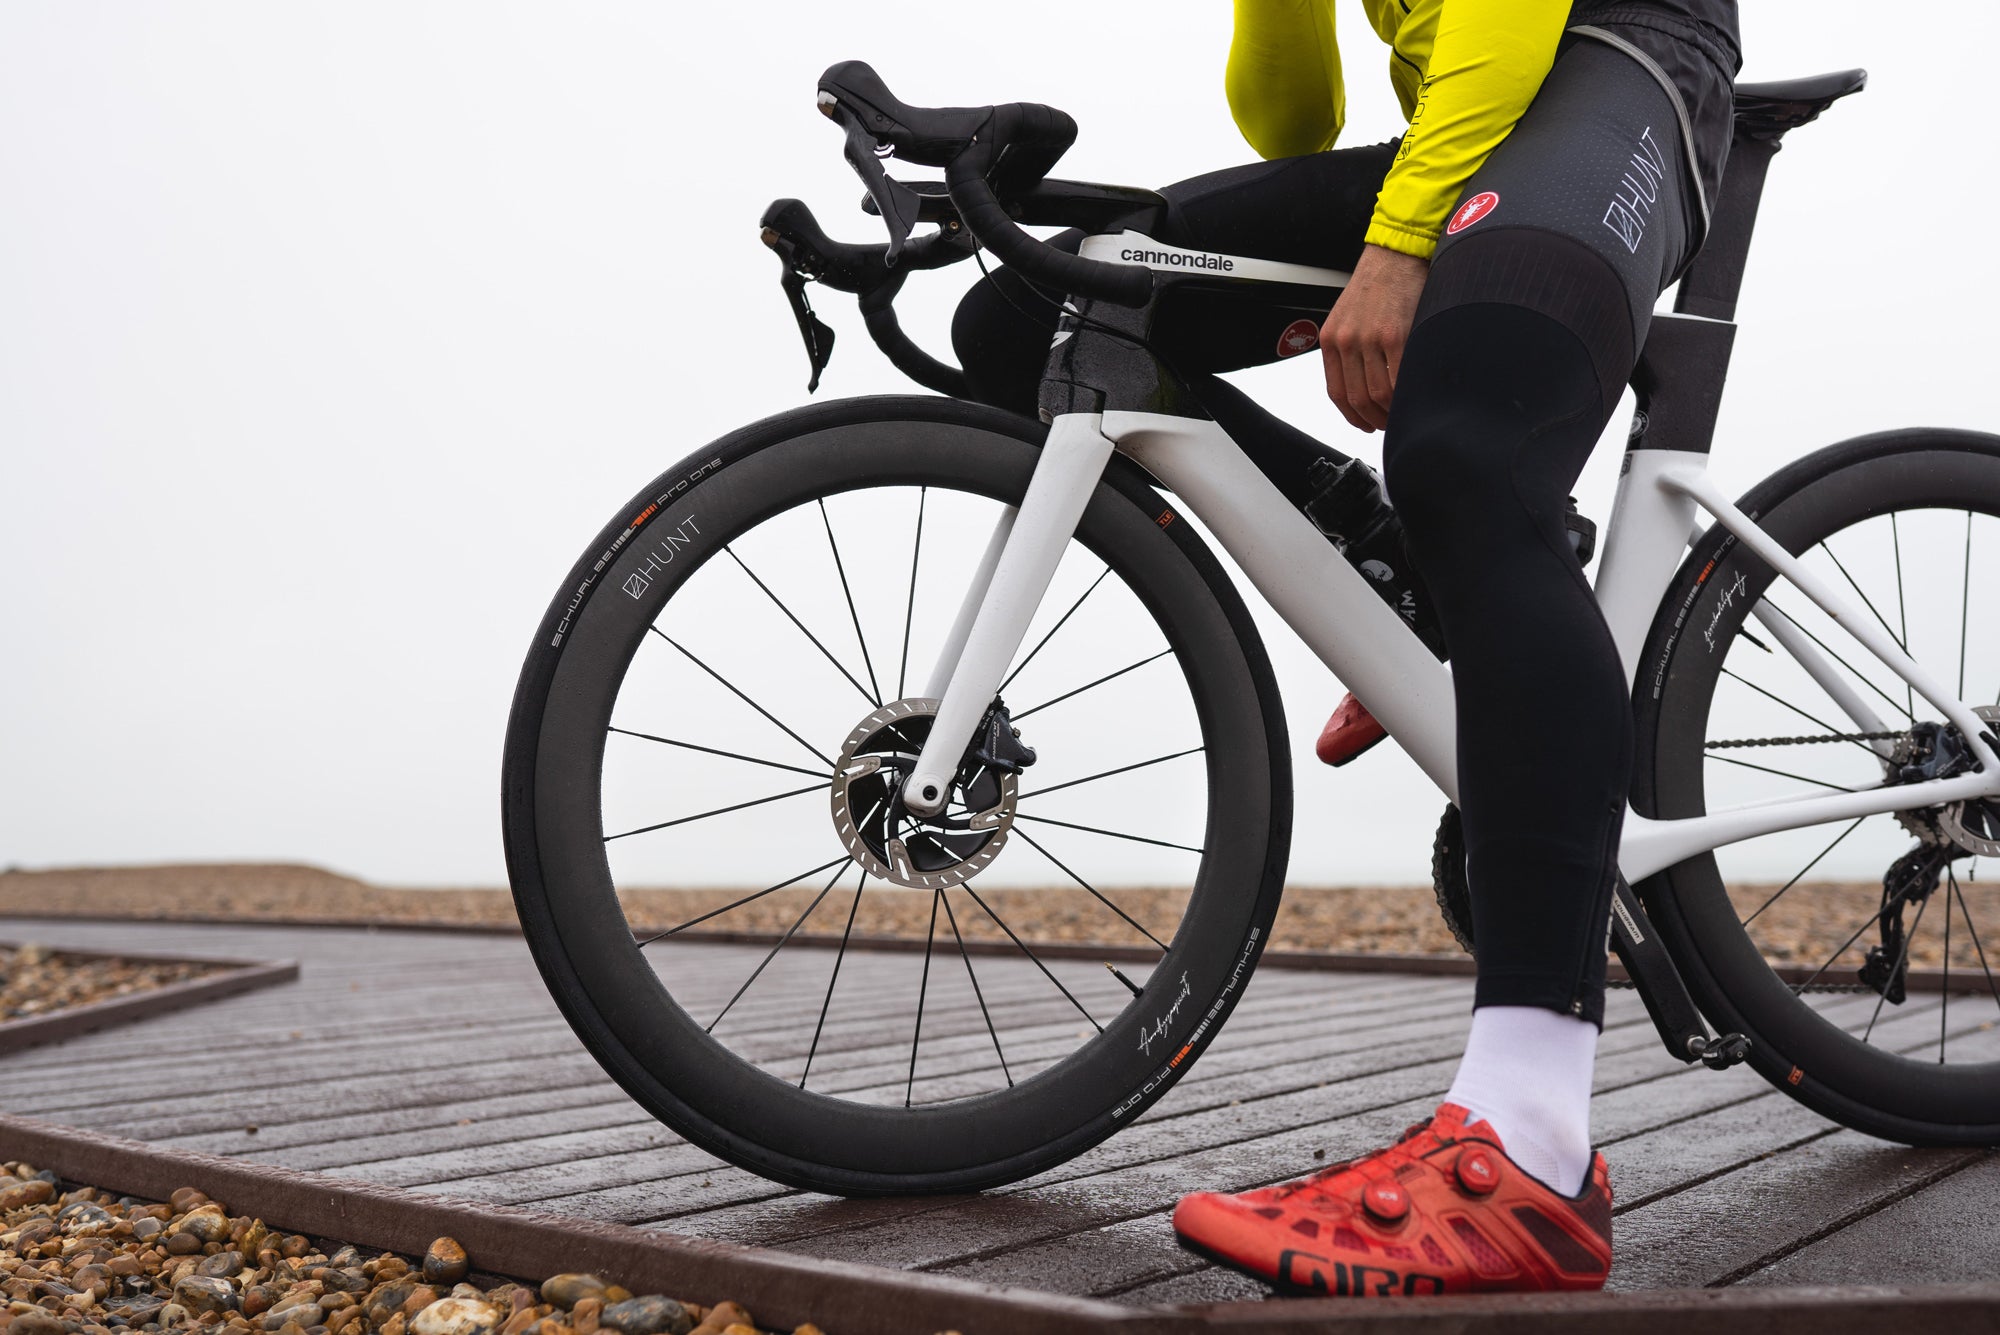 <h1>Tyres</h1><i>At HUNT we enjoy the puncture resistance and grip benefits of tubeless on our every-day rides so we wanted to allow you the same option, but of course these tubeless-ready wheels are also designed to work perfectly inner tubes, just use tubes in tubeless ready tyres.</i>